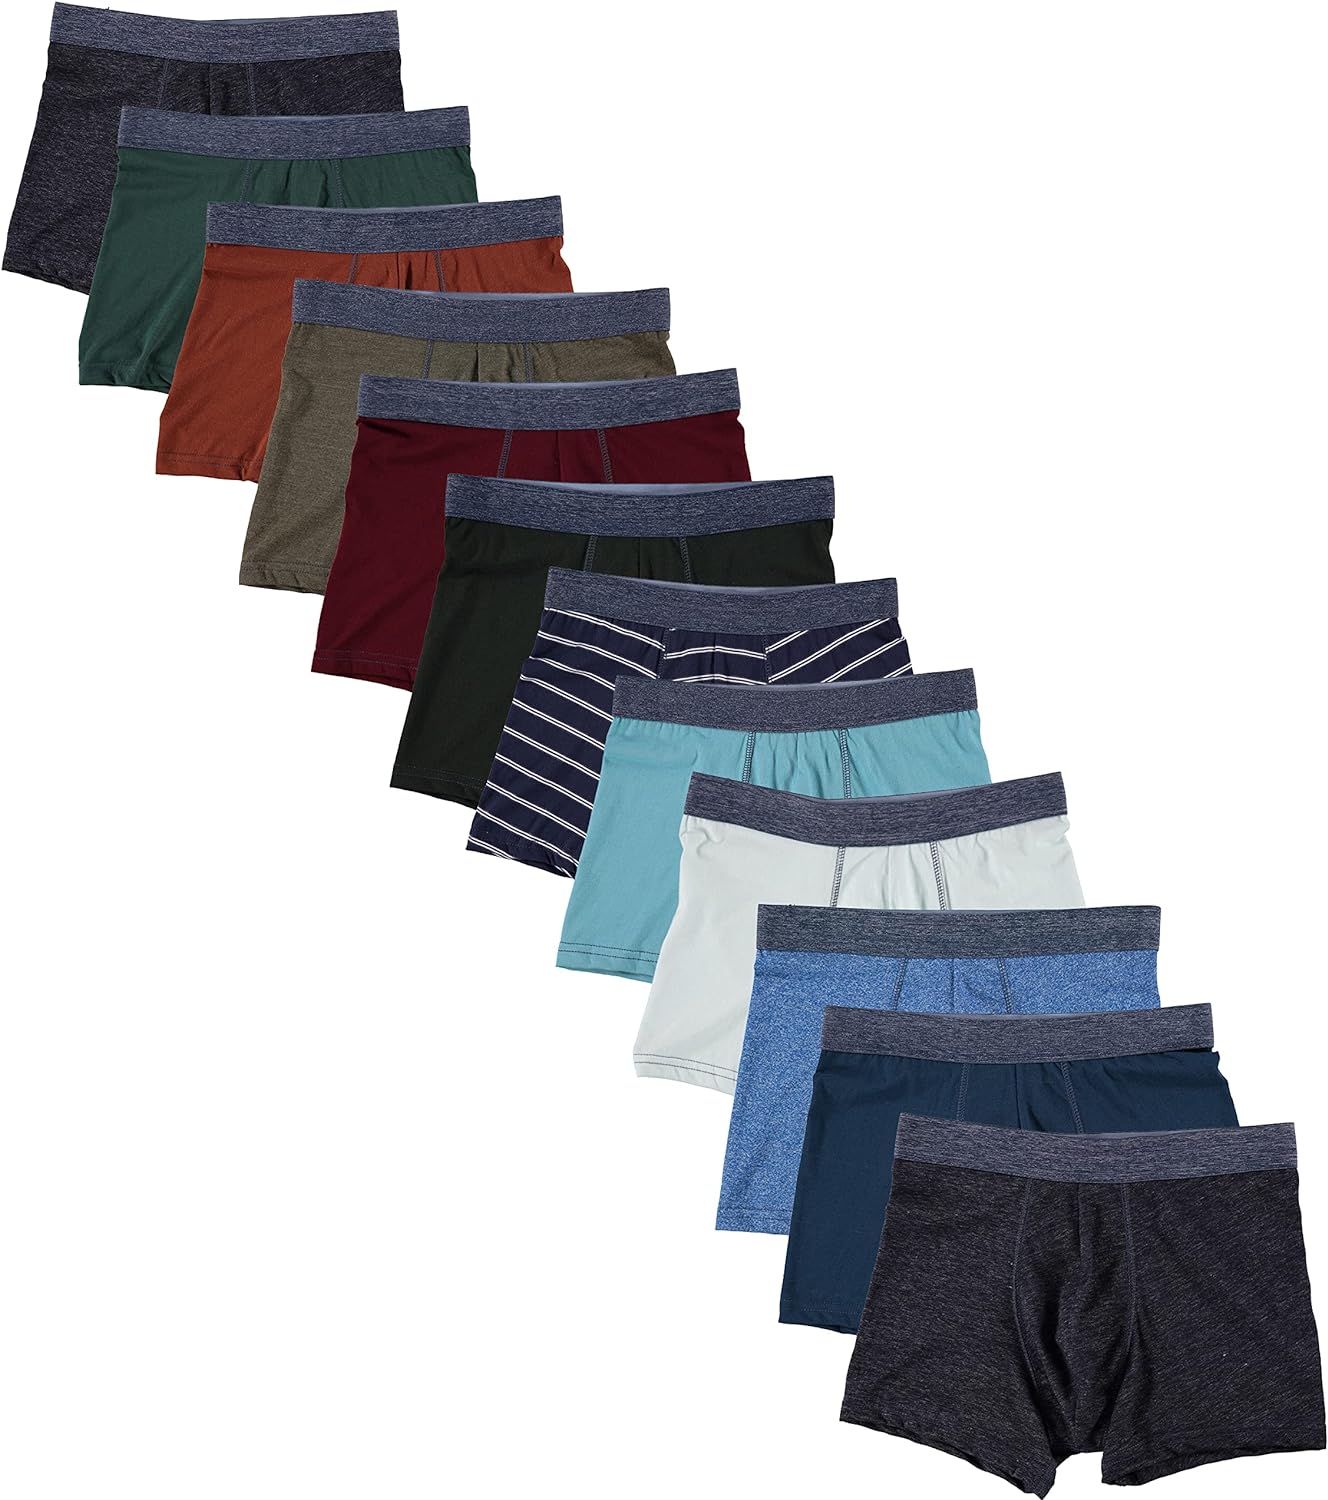 BILLIONHATS 12 Pack Of Mens 100% Cotton Boxer Briefs Underwear, Great for Homeless Shelters Donations, Bulk, Assorted Dark Colors